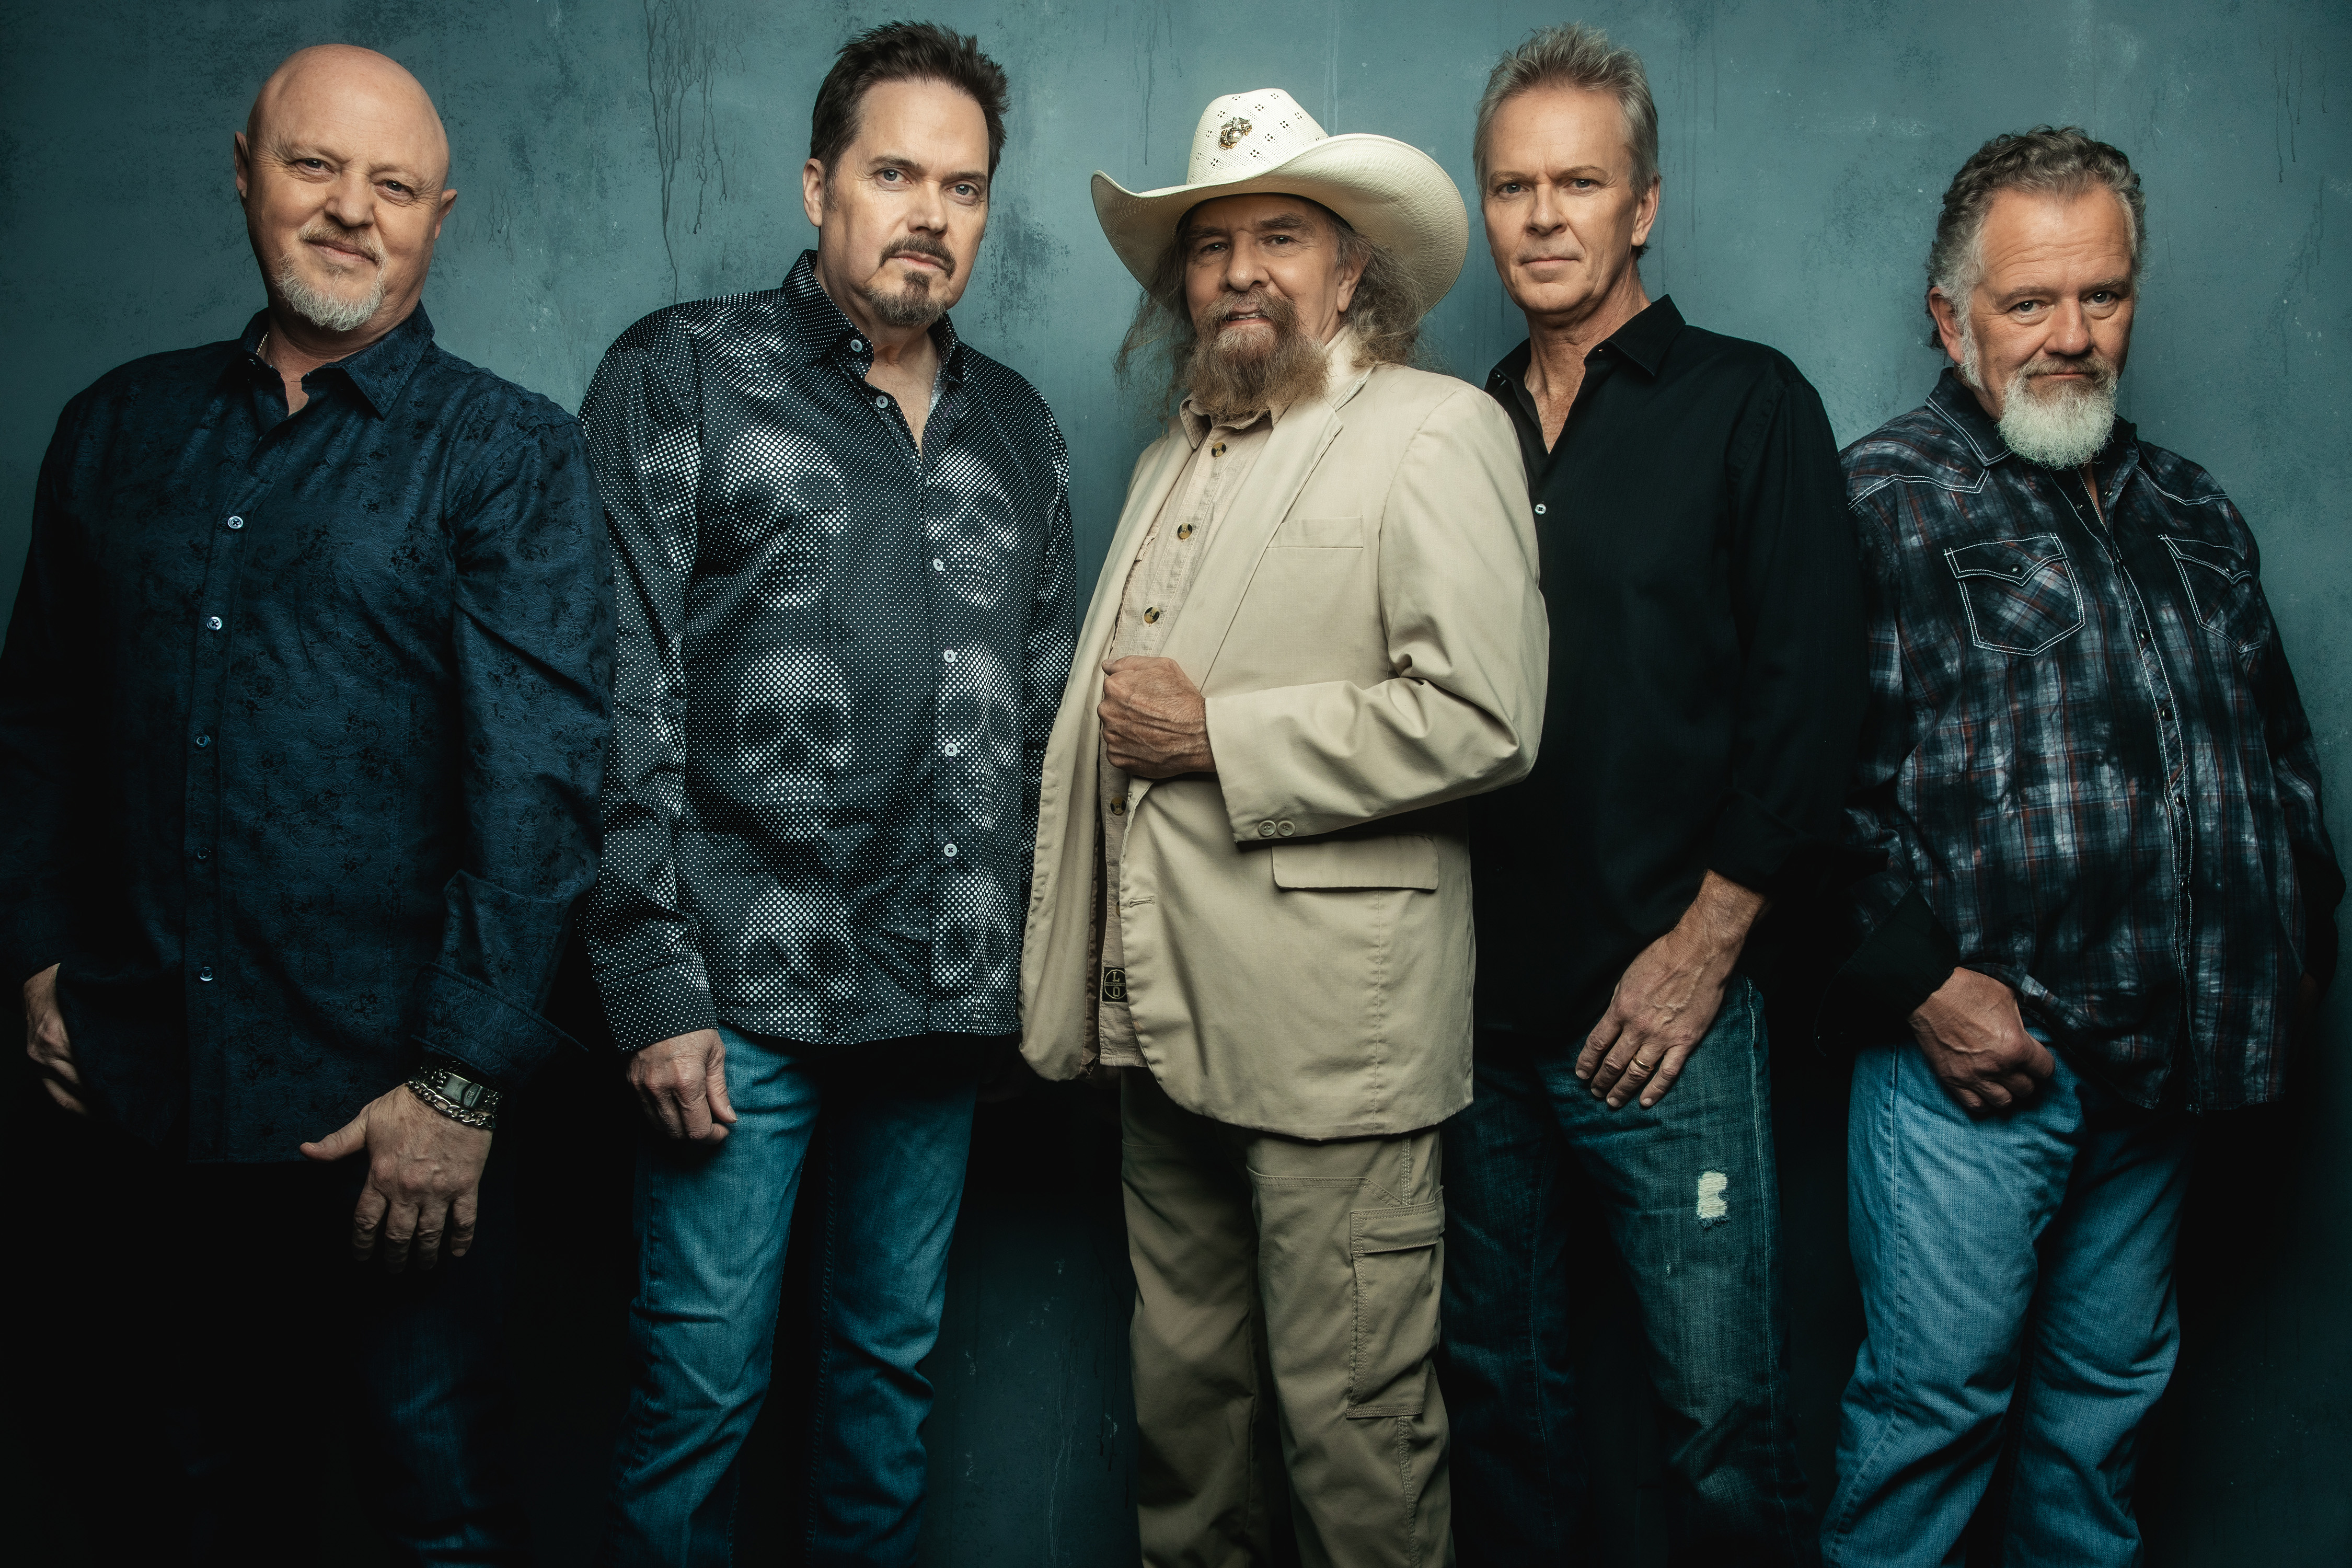   ROCK AND ROLL HALL OF FAMER ARTIMUS PYLE SIGNS WITH GET JOE RECORDS